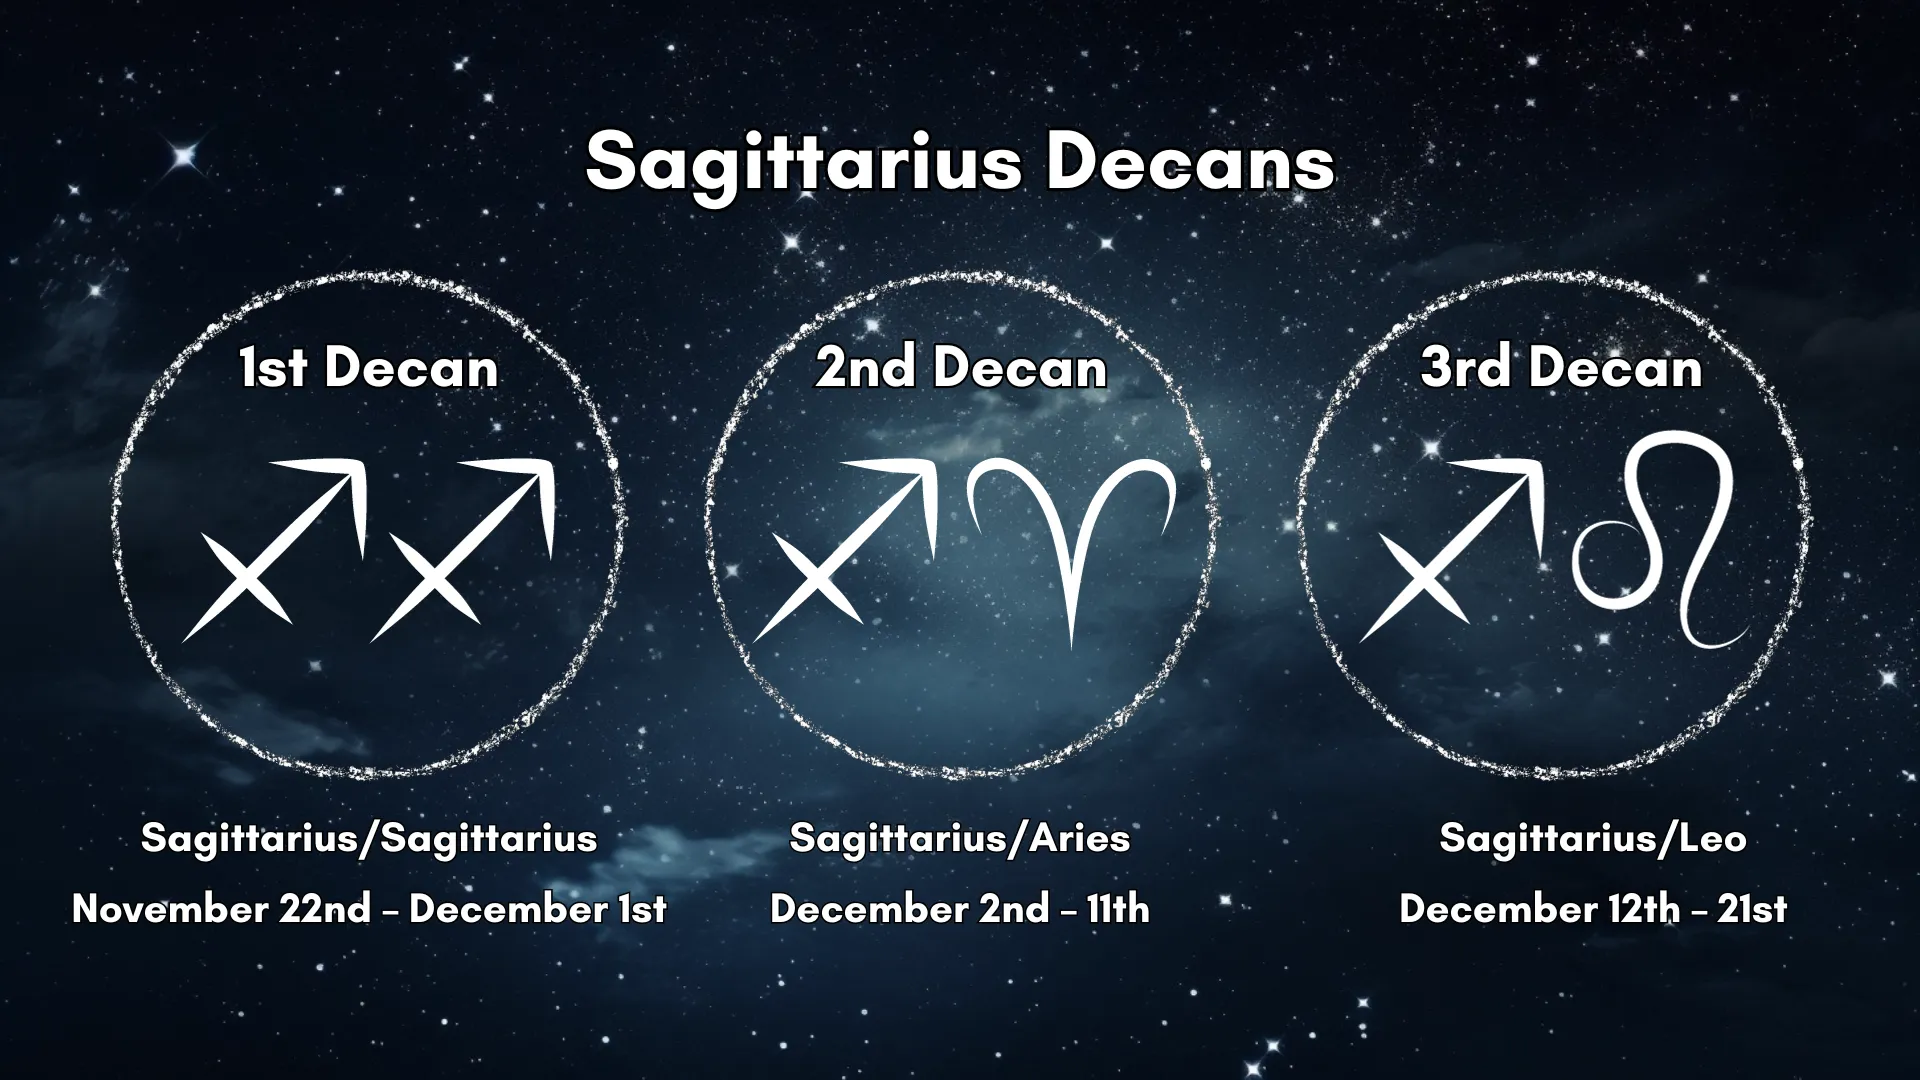 The Sagittarius Decans are laid out in a chart that is easy to understand.